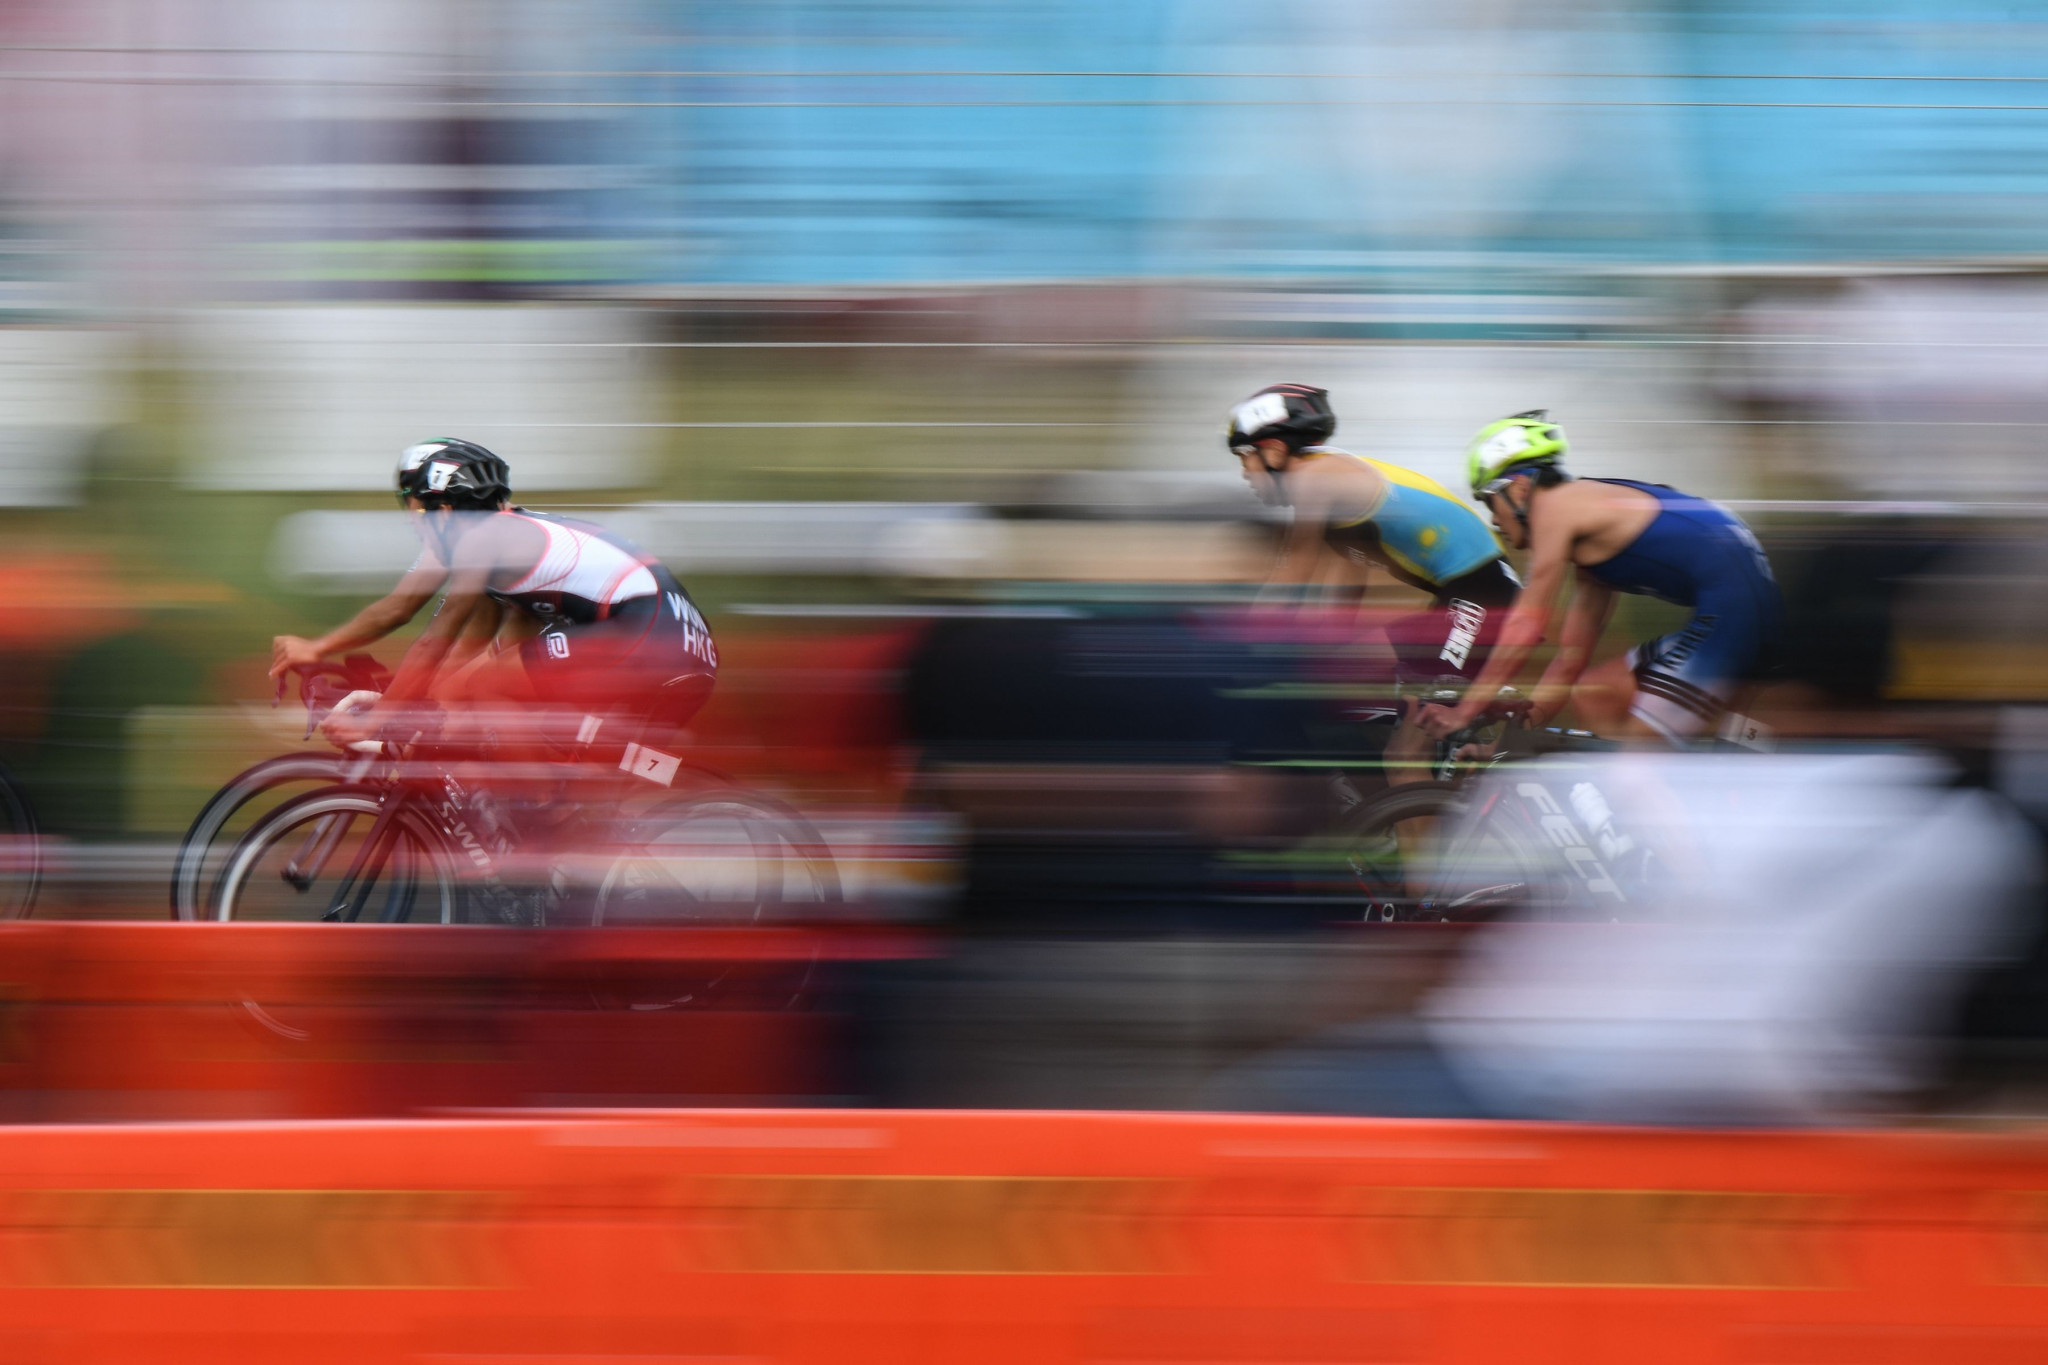 World Triathlon Championship Finals given overlapping dates with Asian Games